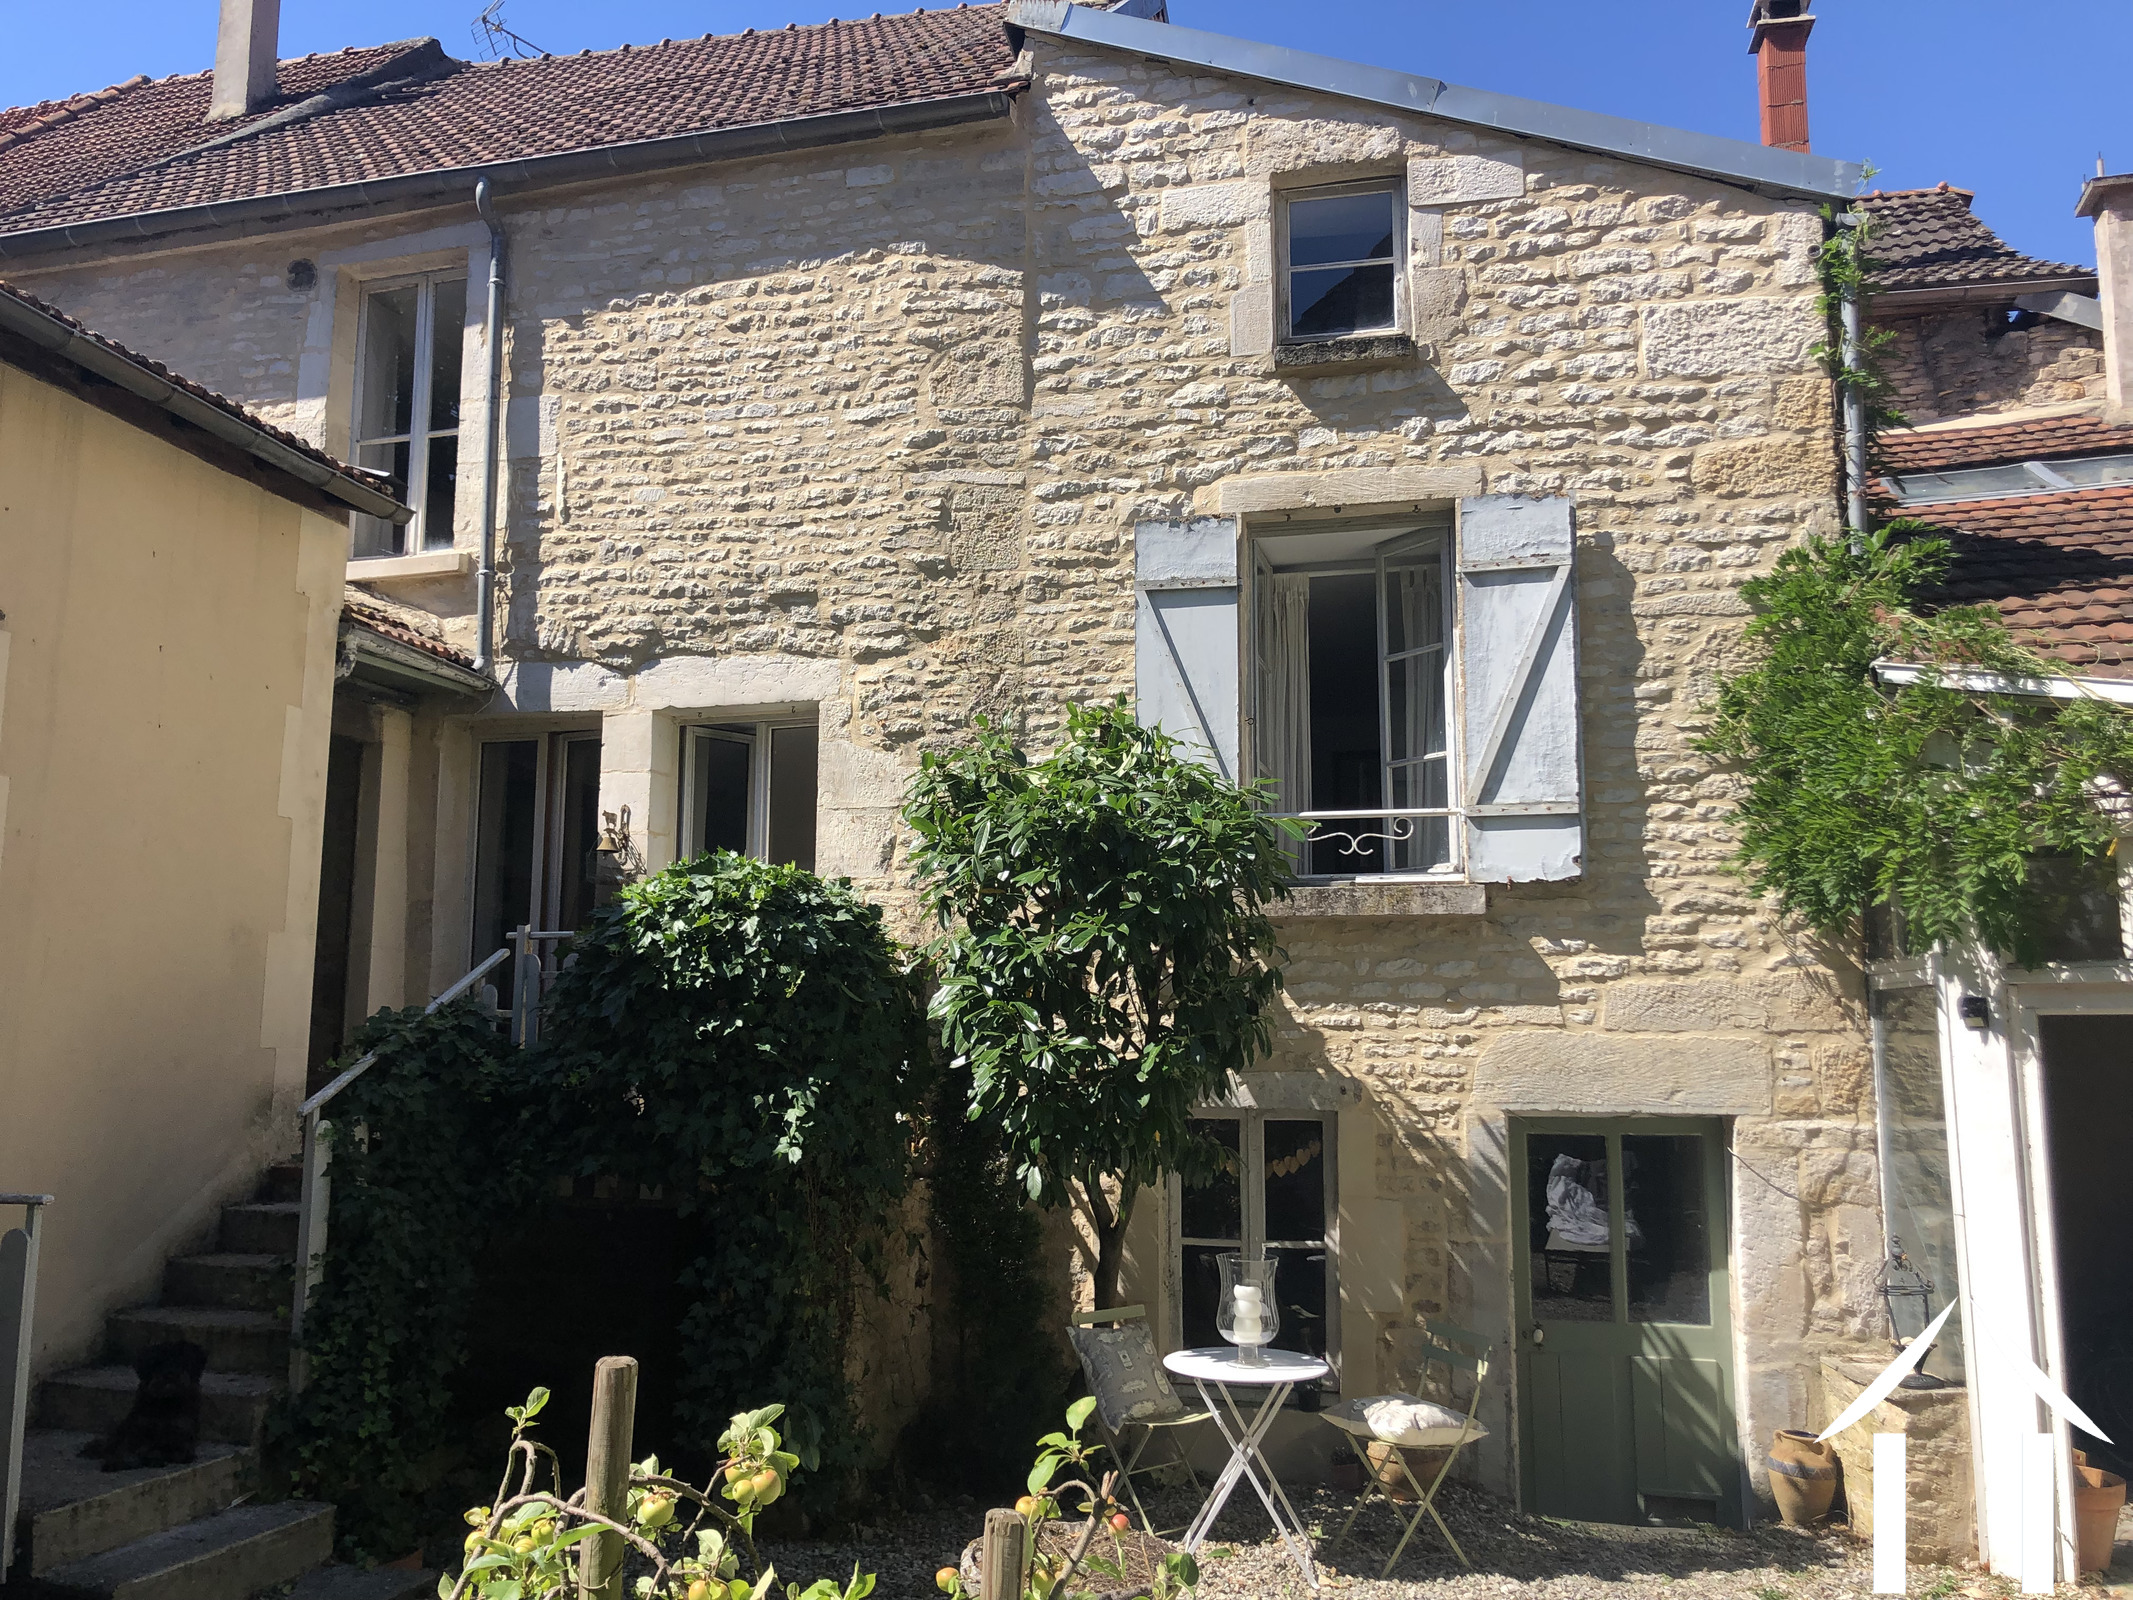 Charming Village House with Internal Courtyard, Burgundy